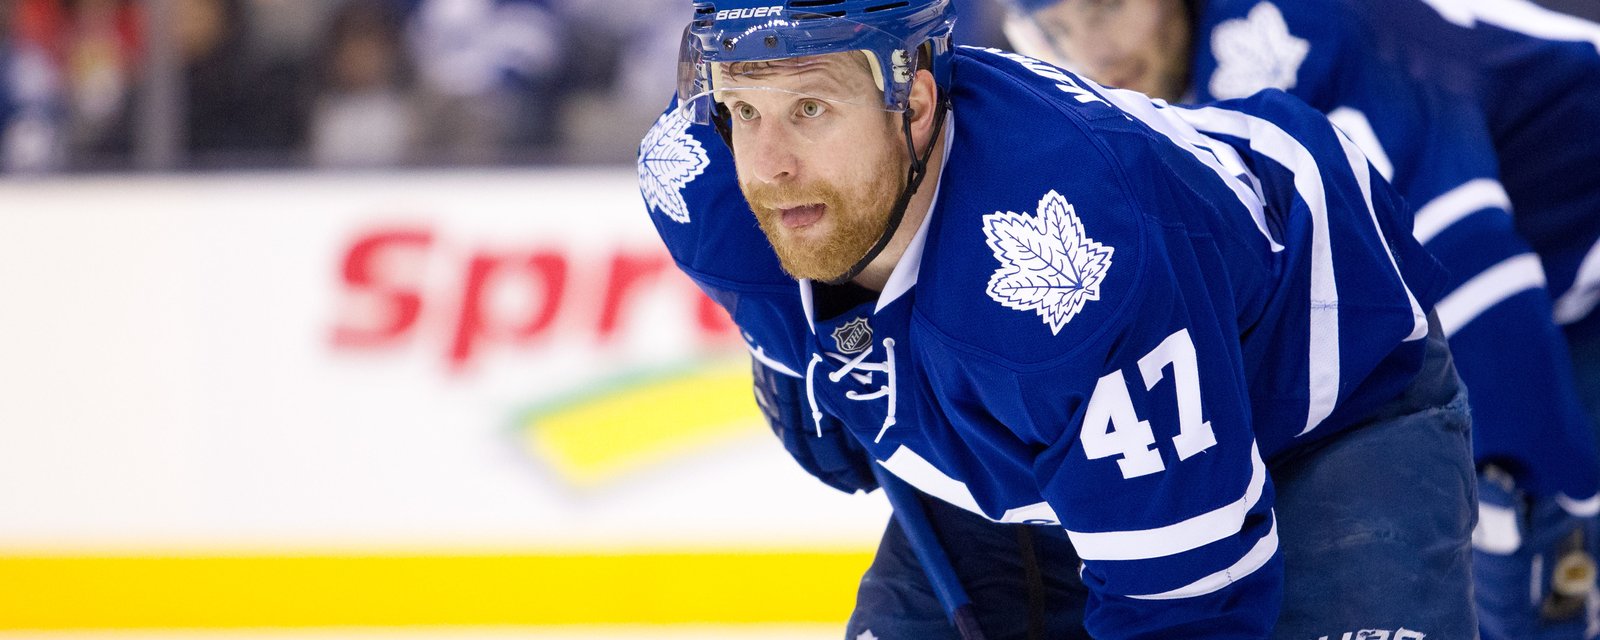 Report: Leafs' youngster shares Leo Komarov's awesome pregame routine 